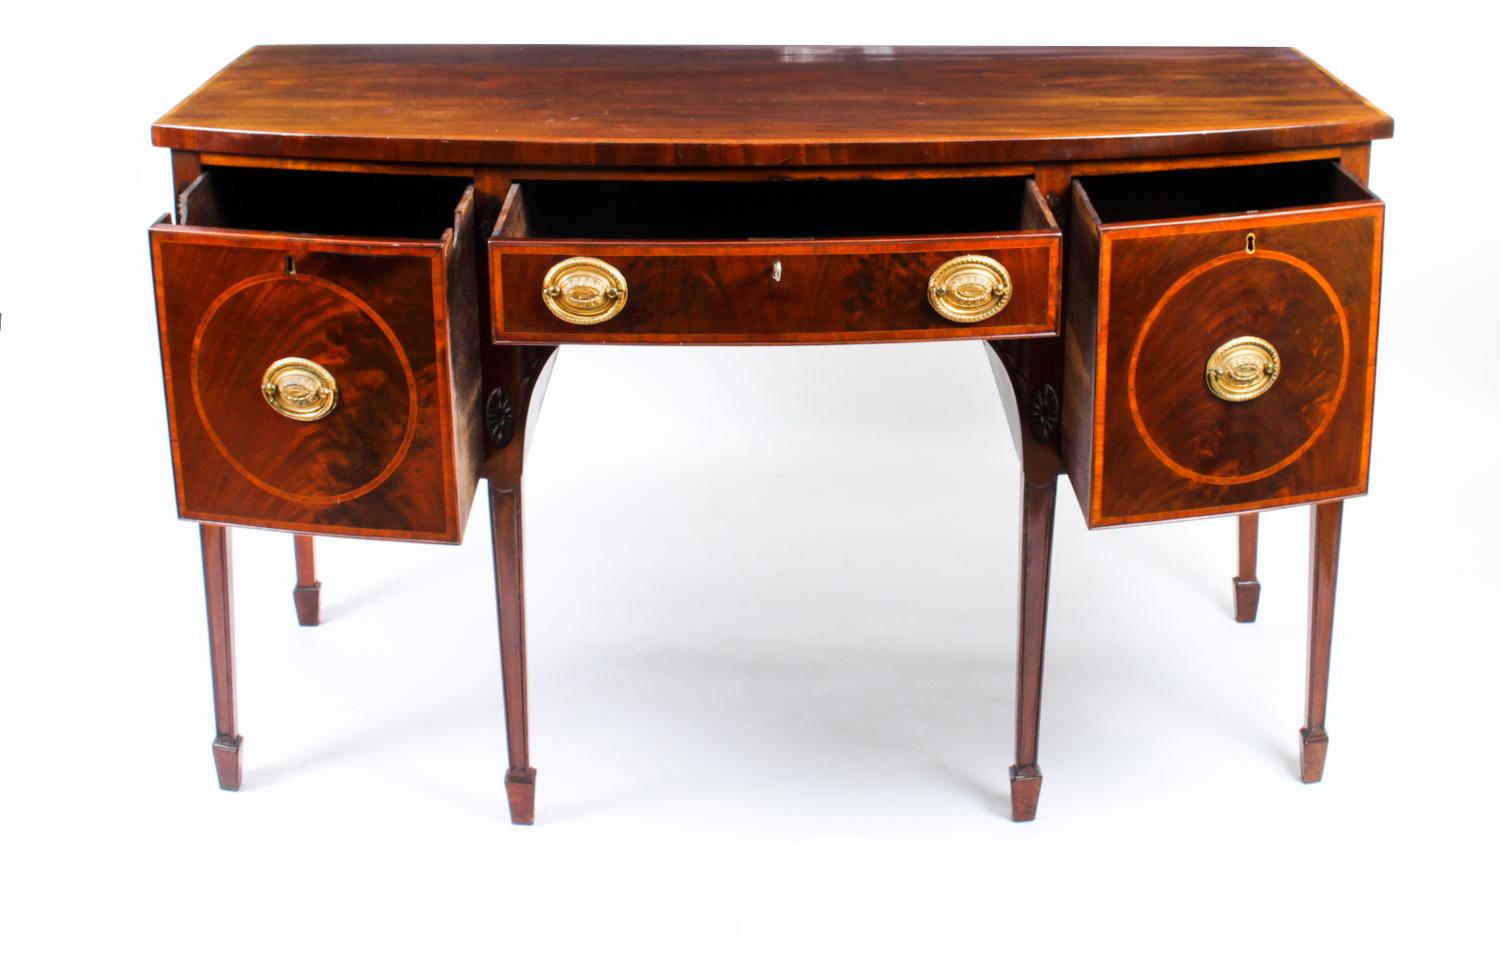 Antique George III Inlaid Flame Mahogany Sideboard, 18th Century For Sale 7